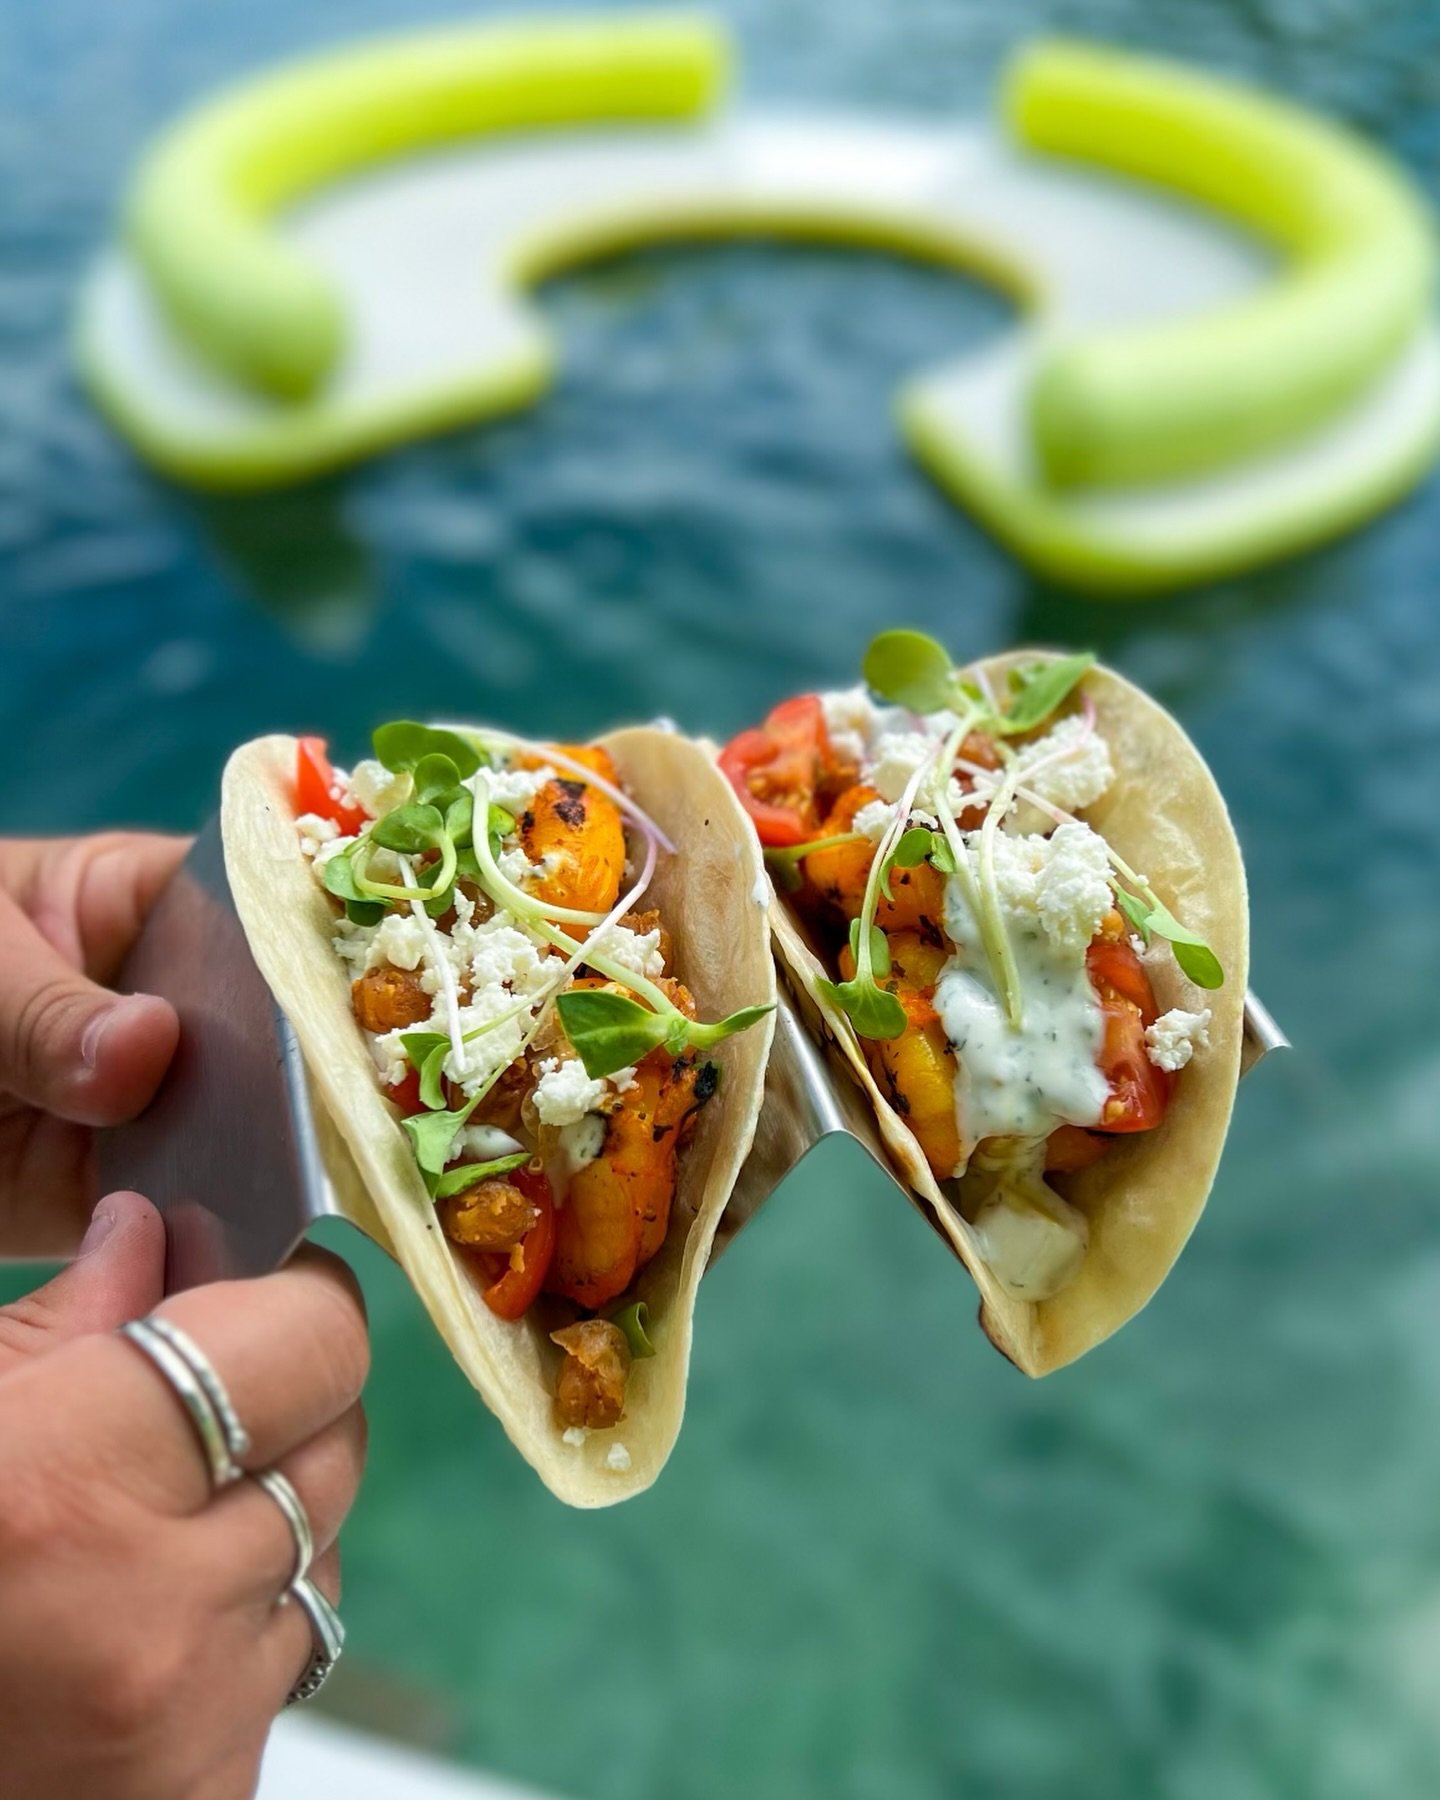 This week&rsquo;s taco special ⟨ until we sellout ⟩ Lemon + sazon shrimp, fried chickpeas, feta, cherry tomato, tzatziki, micro greens! ∕∕∕ OPEN Sunday - Friday &bull; 11:00am - 5:00pm [closed Saturday] 
.
. 
. 
#tacoTuesday #TacoSpecial #LimeOut #Li